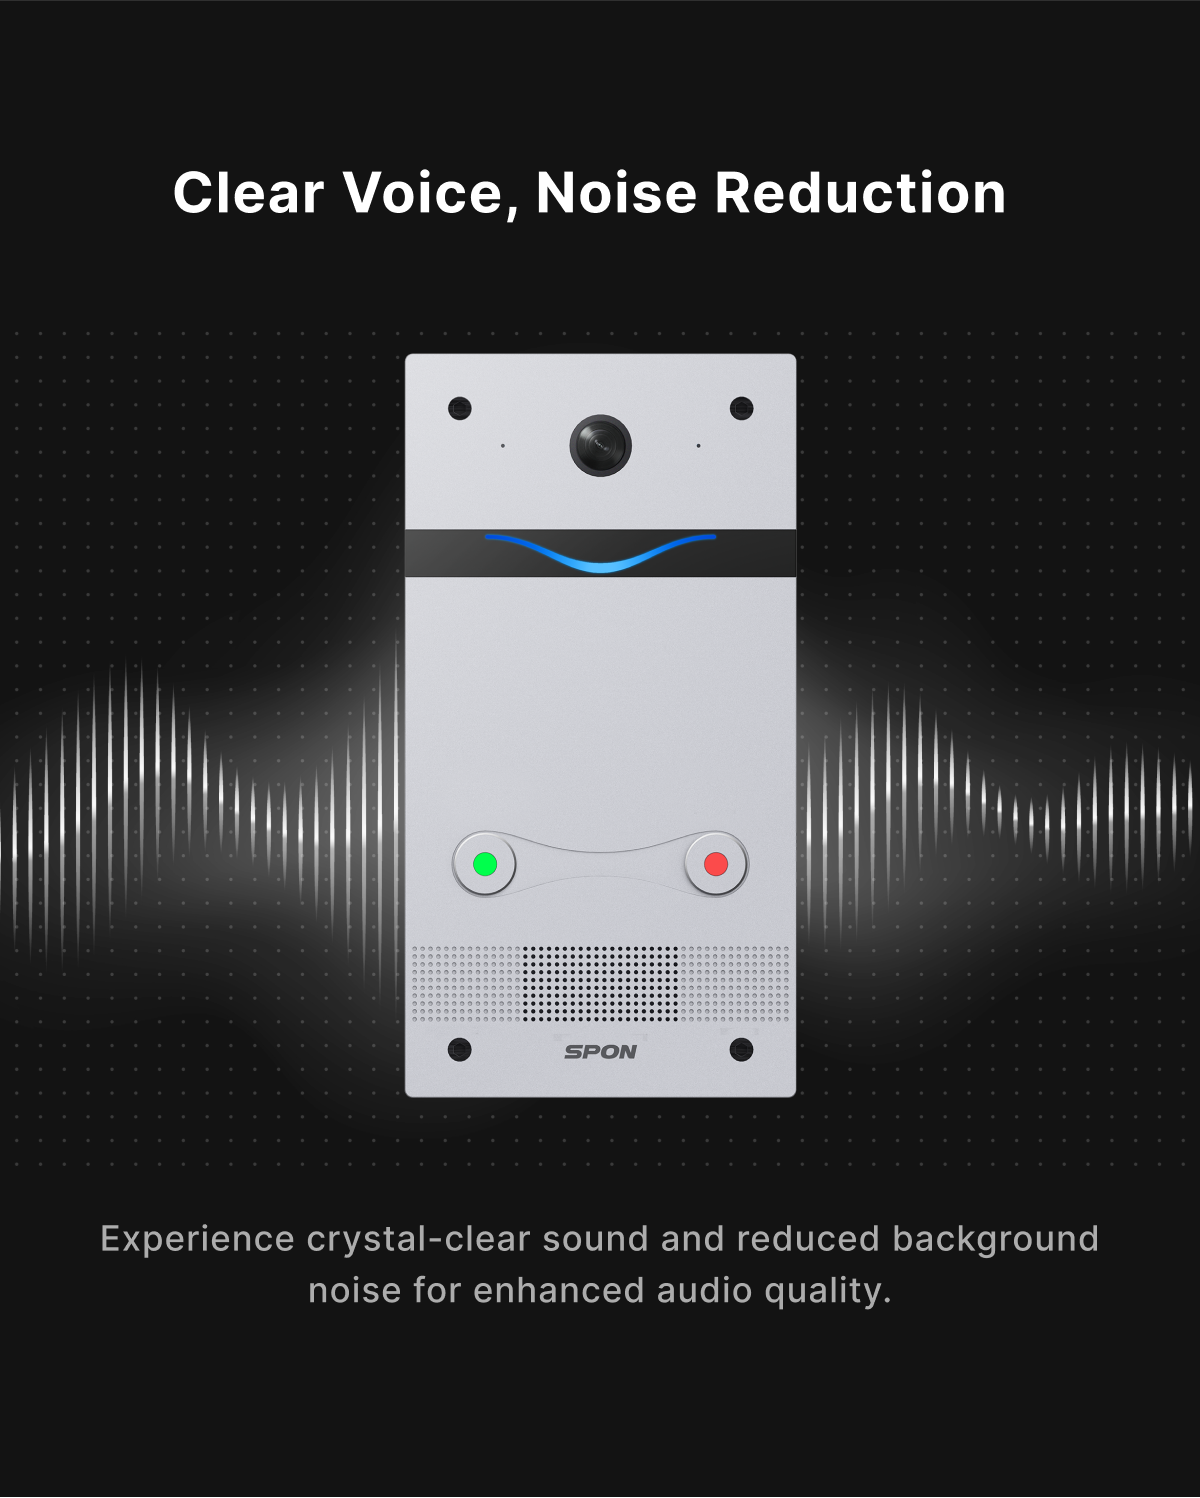 Intelligent Access Intercom Terminal Video Intercom panel with facial recongnition and Alarm fuction, Experience crystal-clear sound and reduced background noise for enhanced audo quality